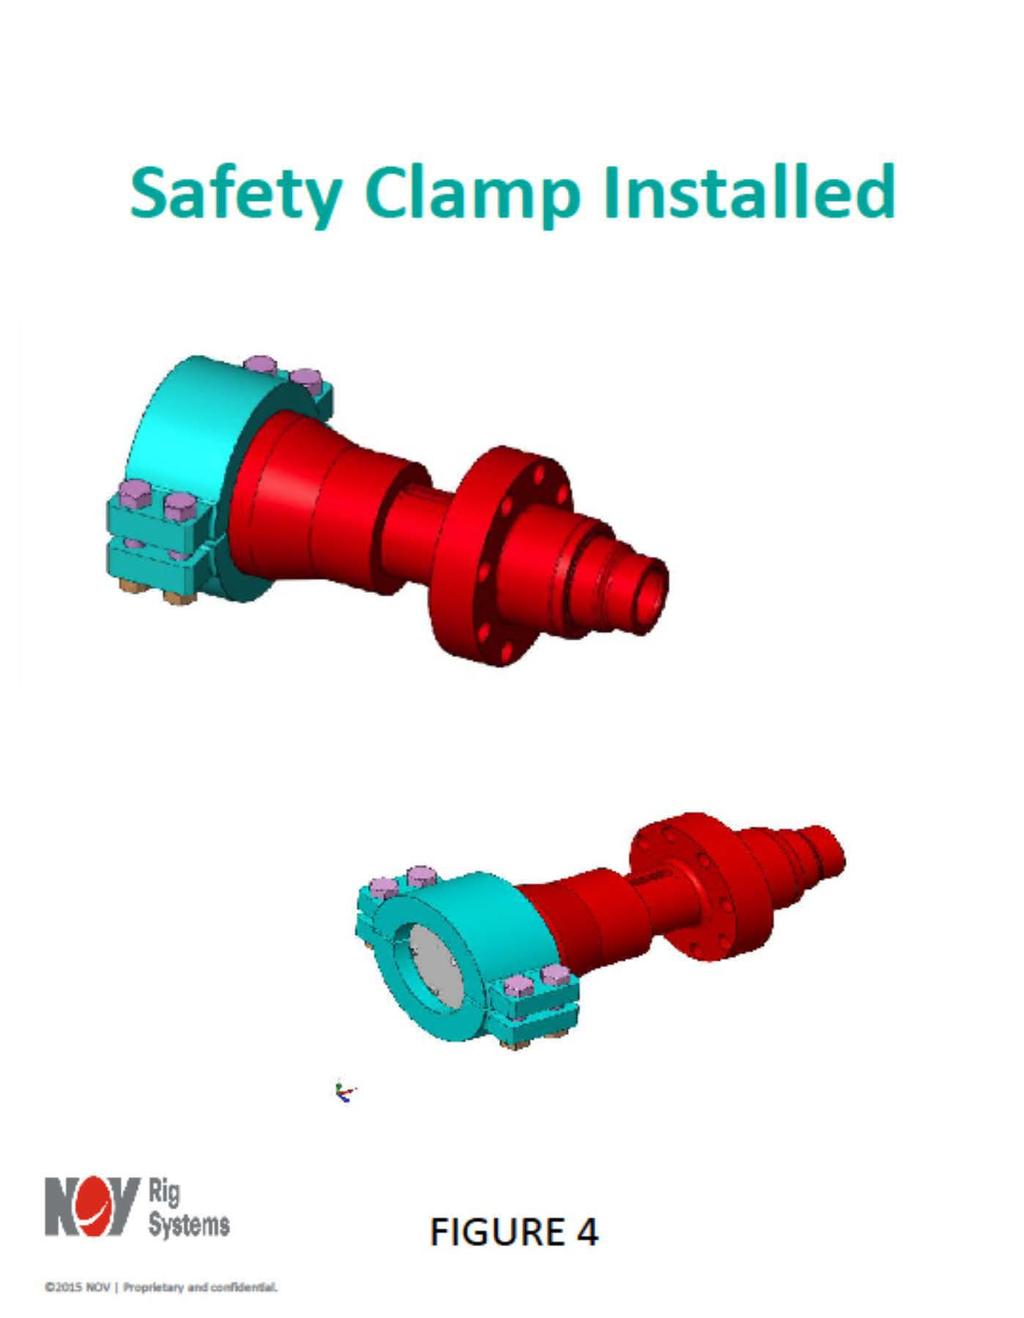 Note: Safety Clamps are to be installed per the NOV Titan BX